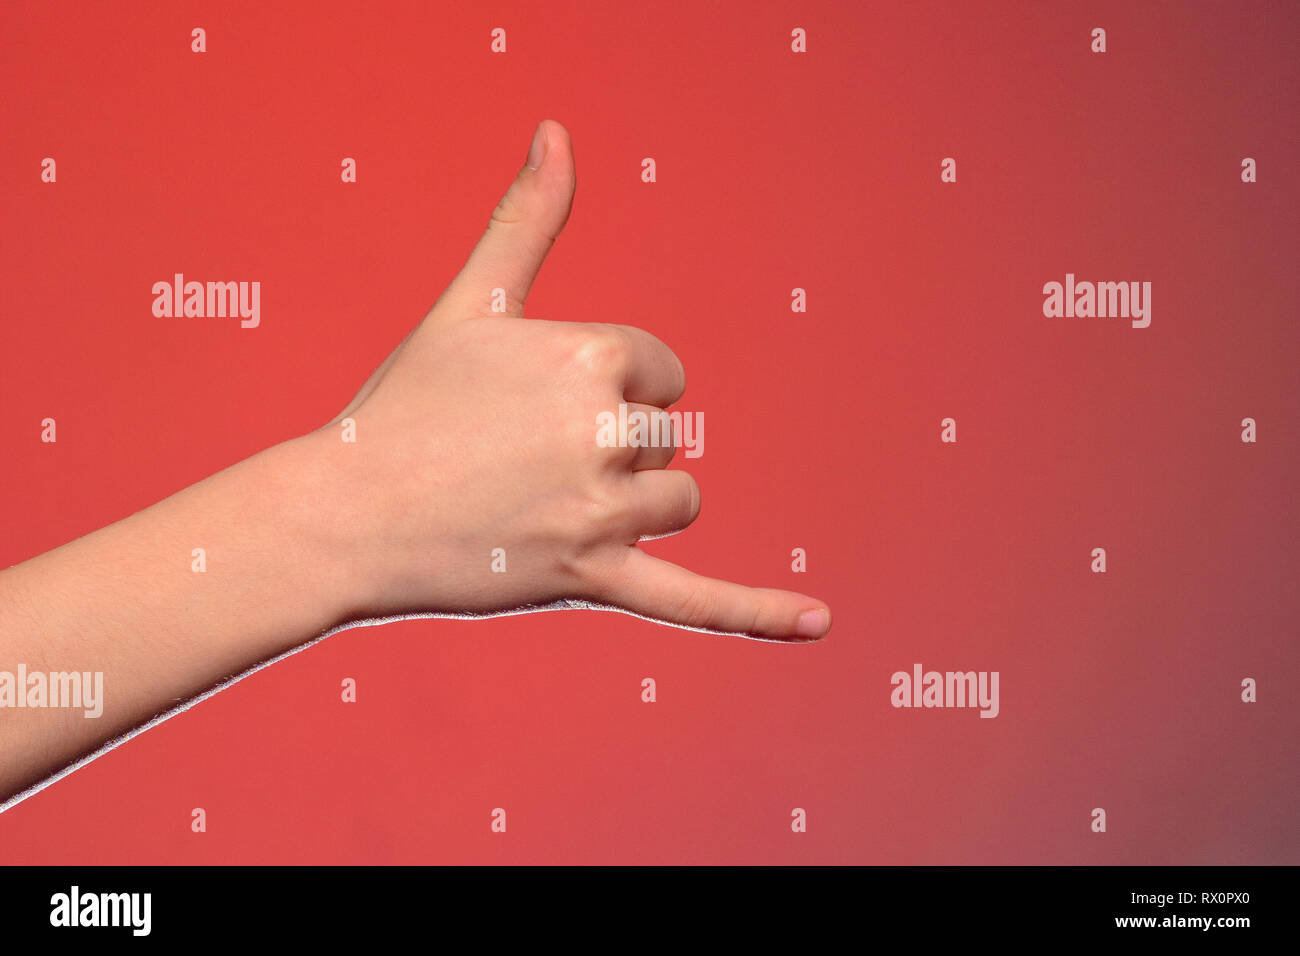 The sign of a phone call shows one-handed isolated on a red background 2019 Stock Photo